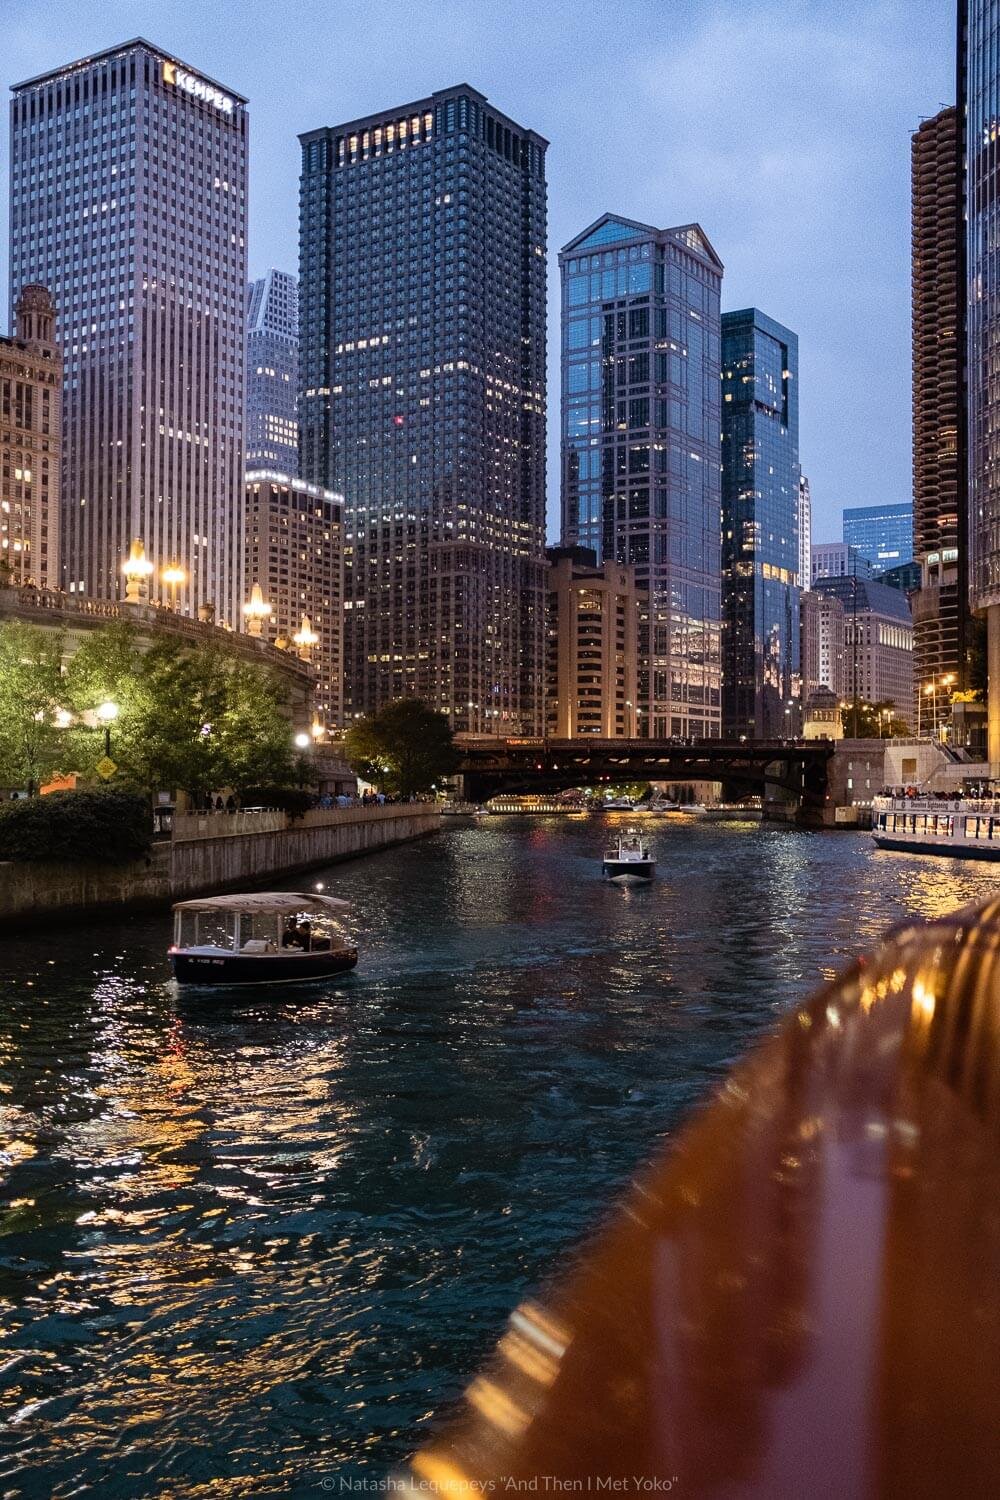 City views from the Architecture Boat Tour, Chicago, USA. Travel photography and guide by © Natasha Lequepeys for "And Then I Met Yoko". #chicago #usa #travelblog #travelphotography